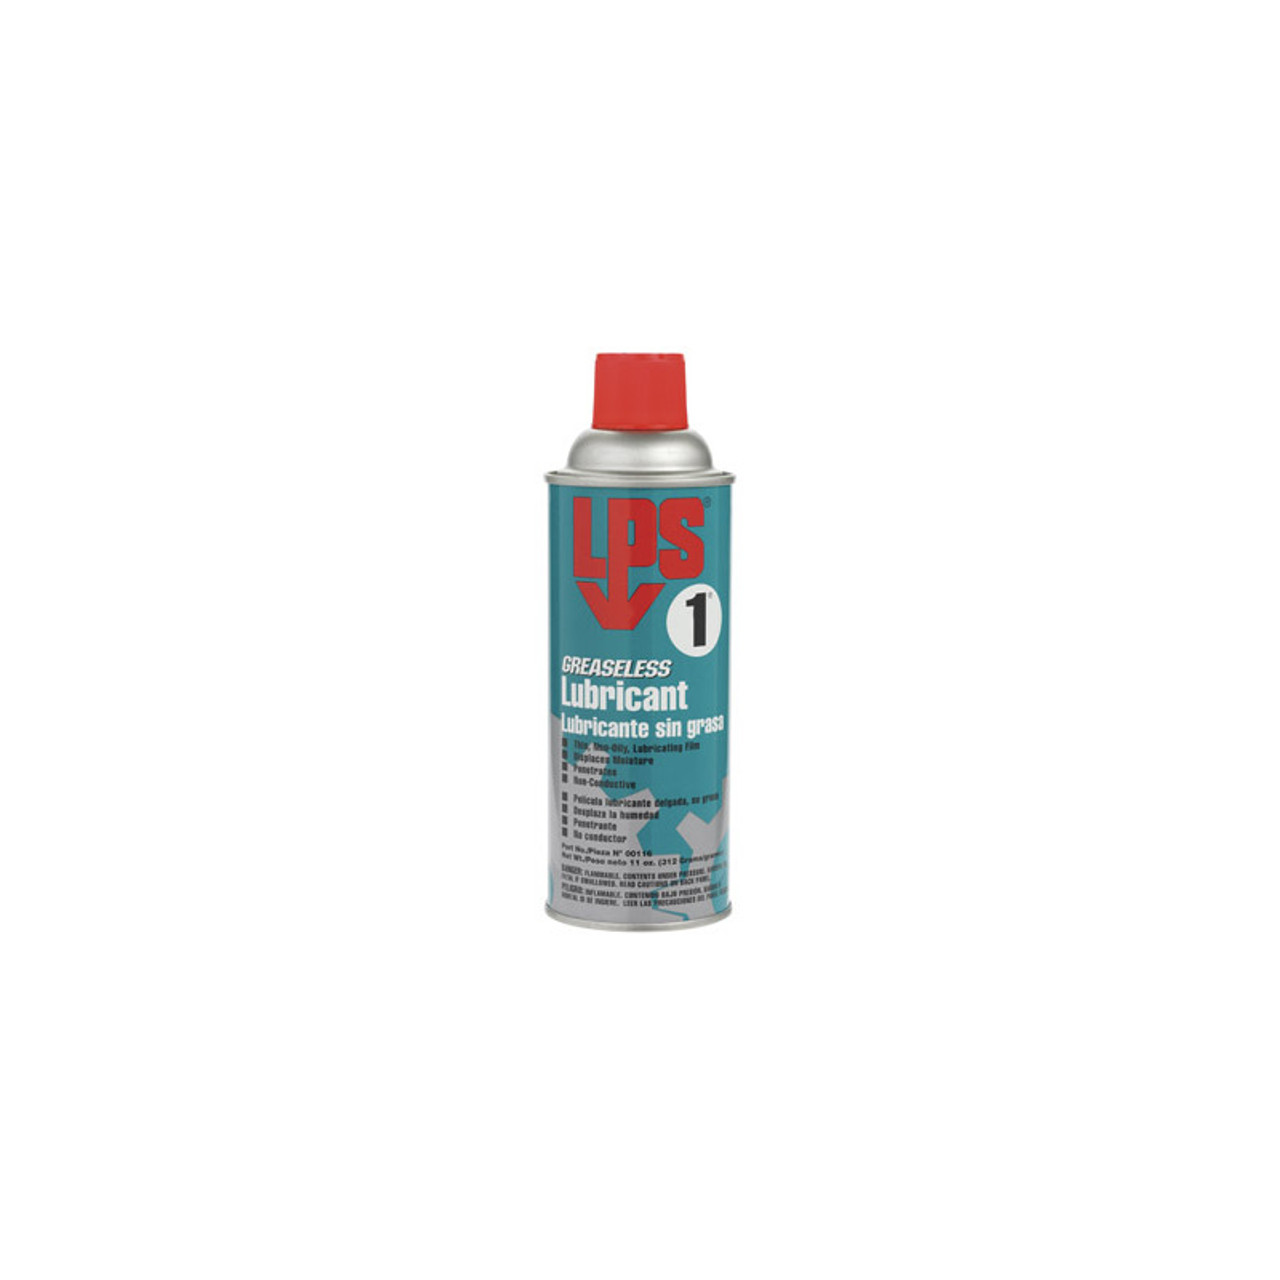 Greaseless Lubricant Aerosol Can 11 oz LPS No. 1 - Whitehead Industrial ...